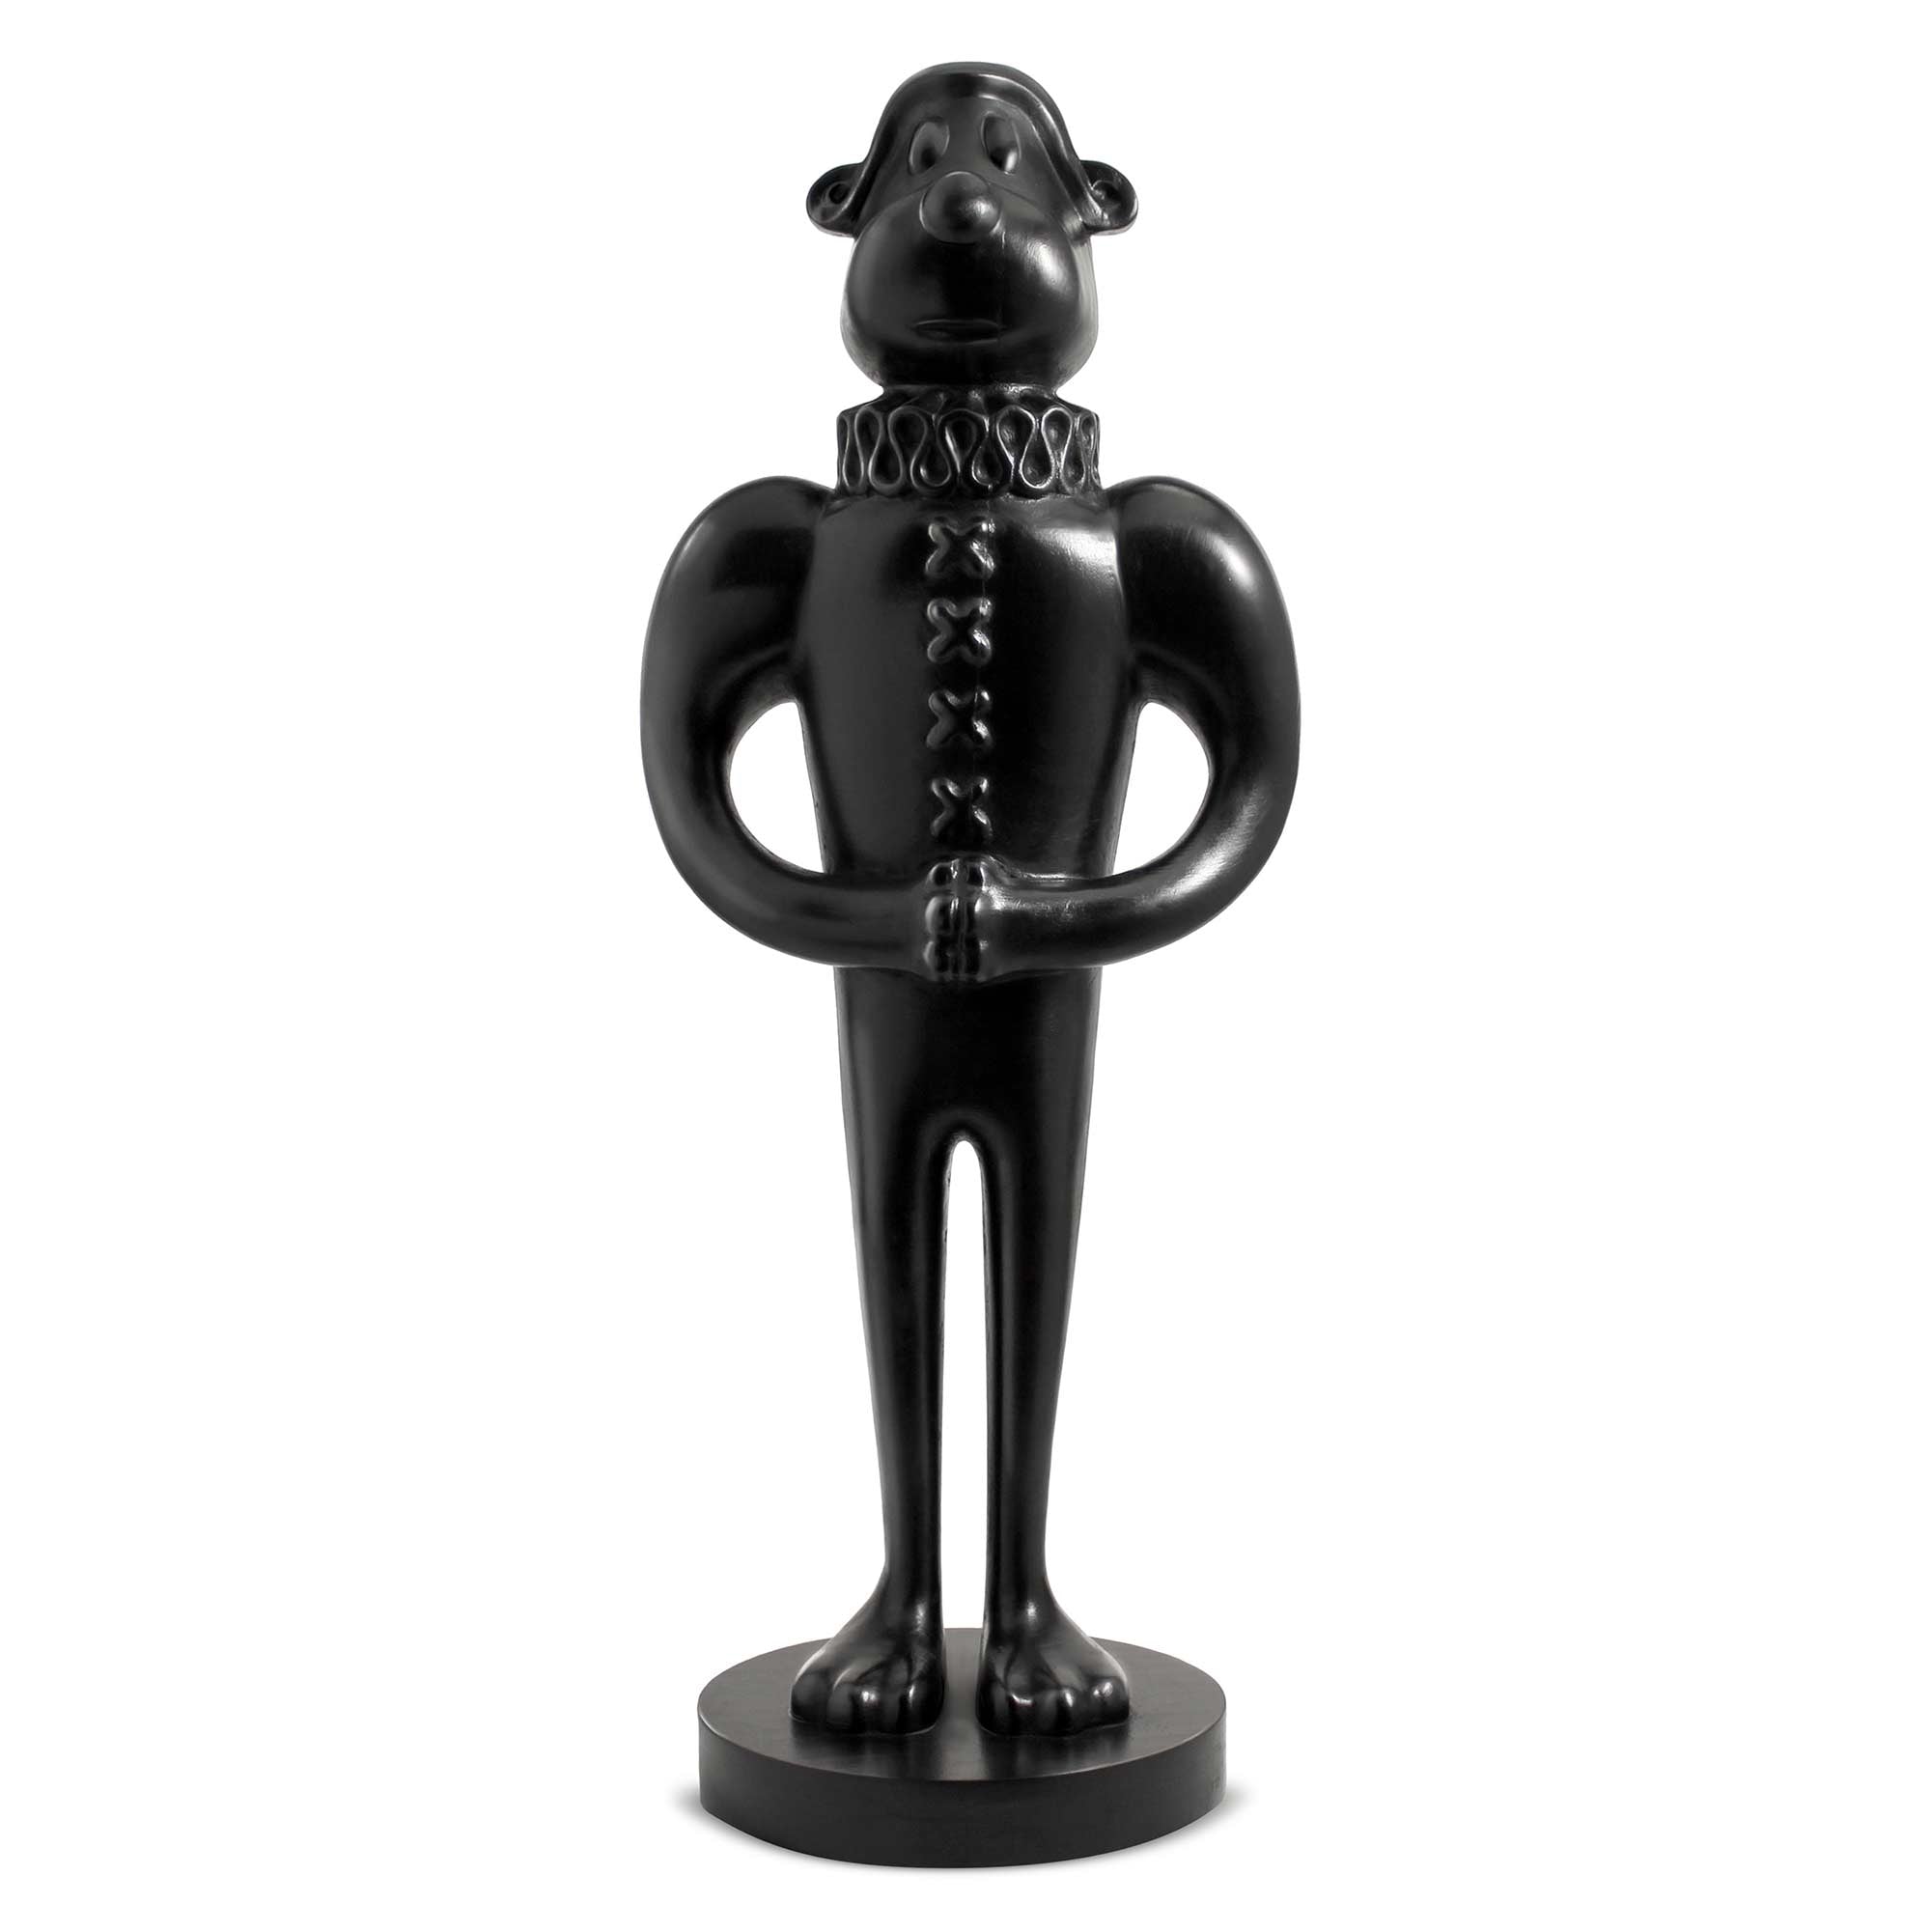 William, dog wood sculpture with black polished, by artist Ferdi B Dick, front view